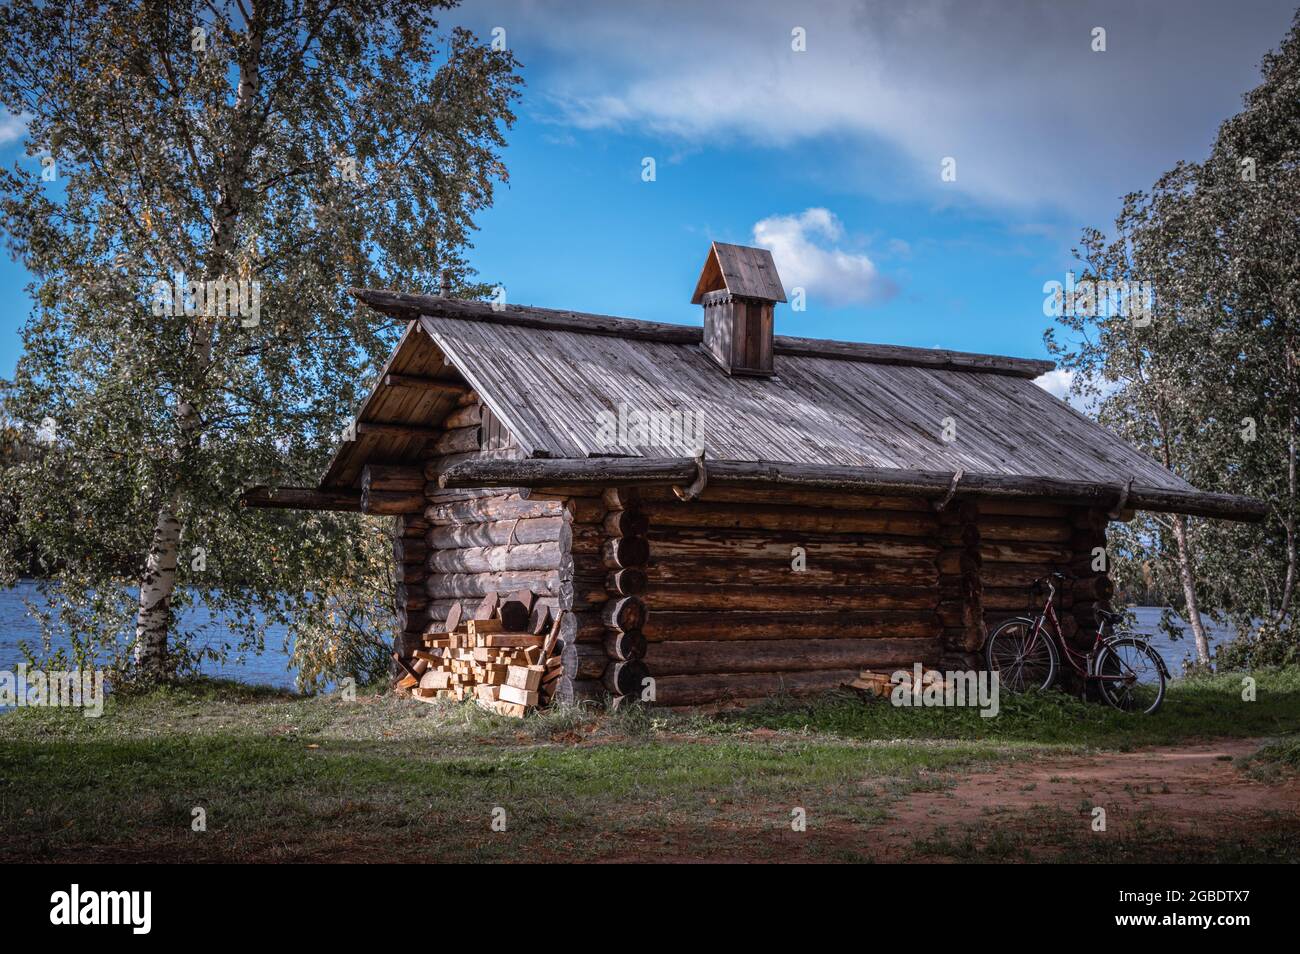 Ancient wooden house on the bank of the Svir river. Mandrogi Village, Russia. Stock Photo